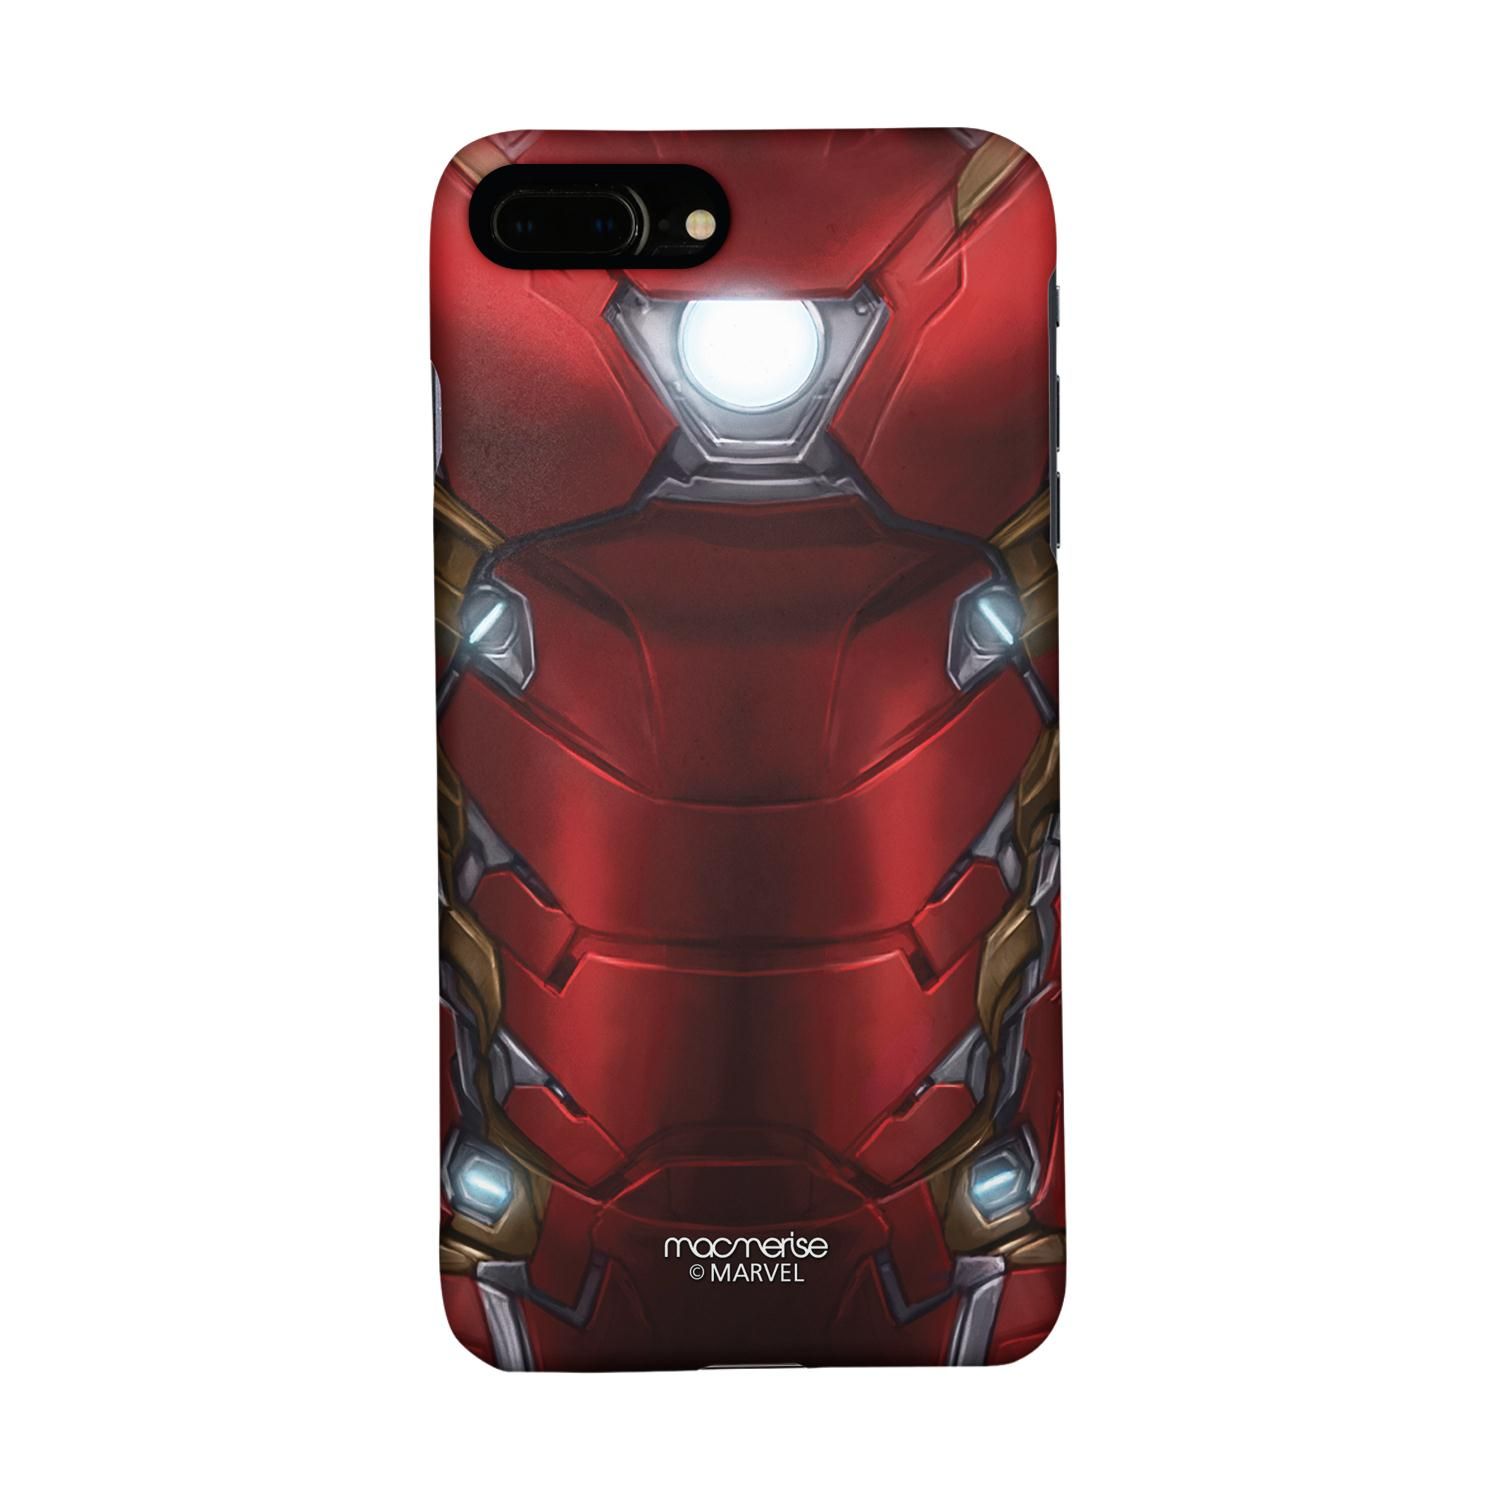 Buy Suit up Ironman - Sleek Phone Case for iPhone 7 Plus Online